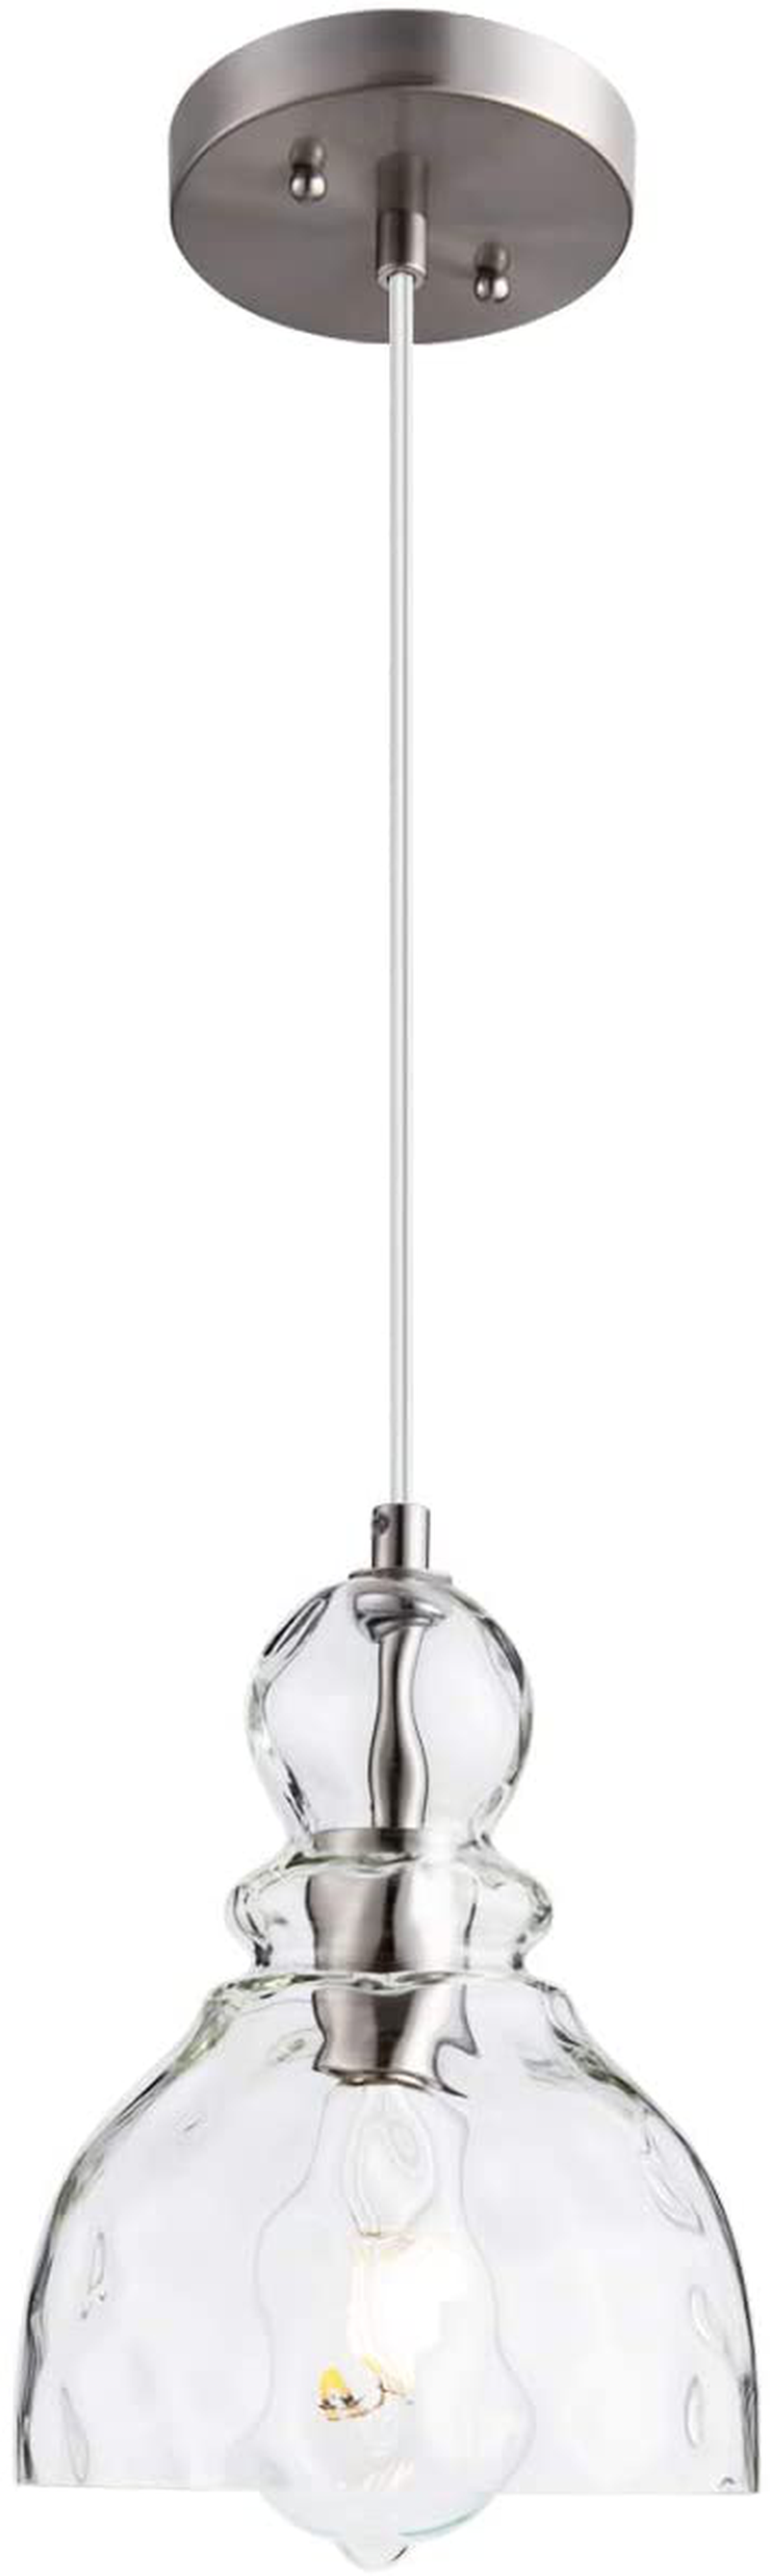 LANROS Farmhouse Mini Pendant Lighting with Handblown Clear Hammered Glass Shade, Adjustable Cord Ceiling Light Fixture for Kitchen Island Hallway Kitchen Sink, Black, 7inch Home & Garden > Lighting > Lighting Fixtures LANROS Hammered, Brushed Nickel  